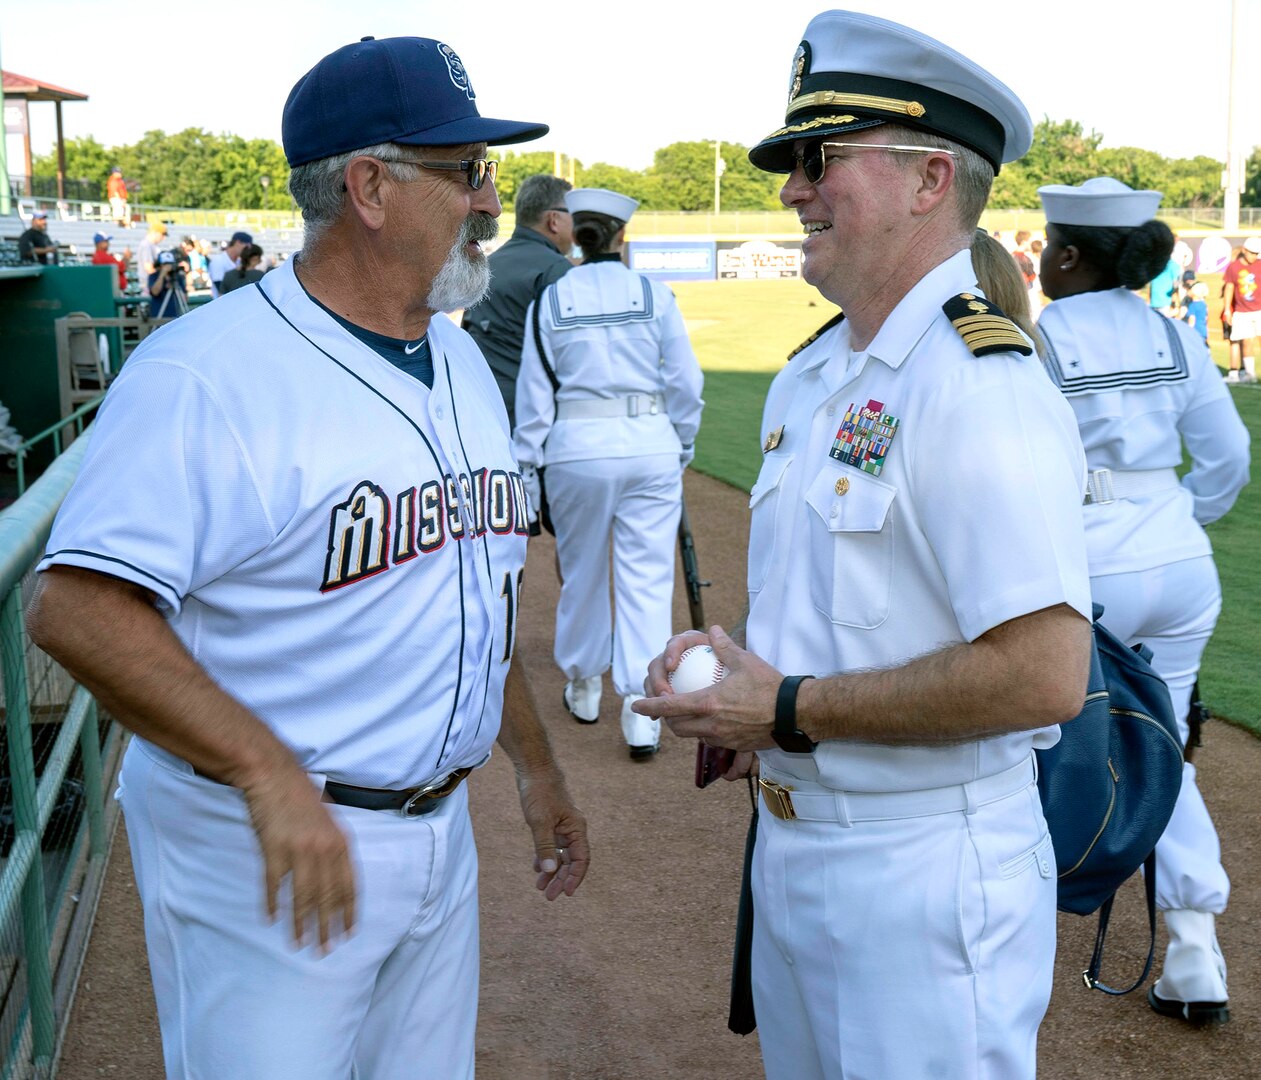 Capt. Timothy Richardson (right), deputy commander of Navy Medicine Education, Training and Logistics Command, or NMETLC, talks with Rick Sweet, manager of the San Antonio Missions baseball team, after throwing out the first pitch at the Missions baseball game in honor of military appreciation night June 12.